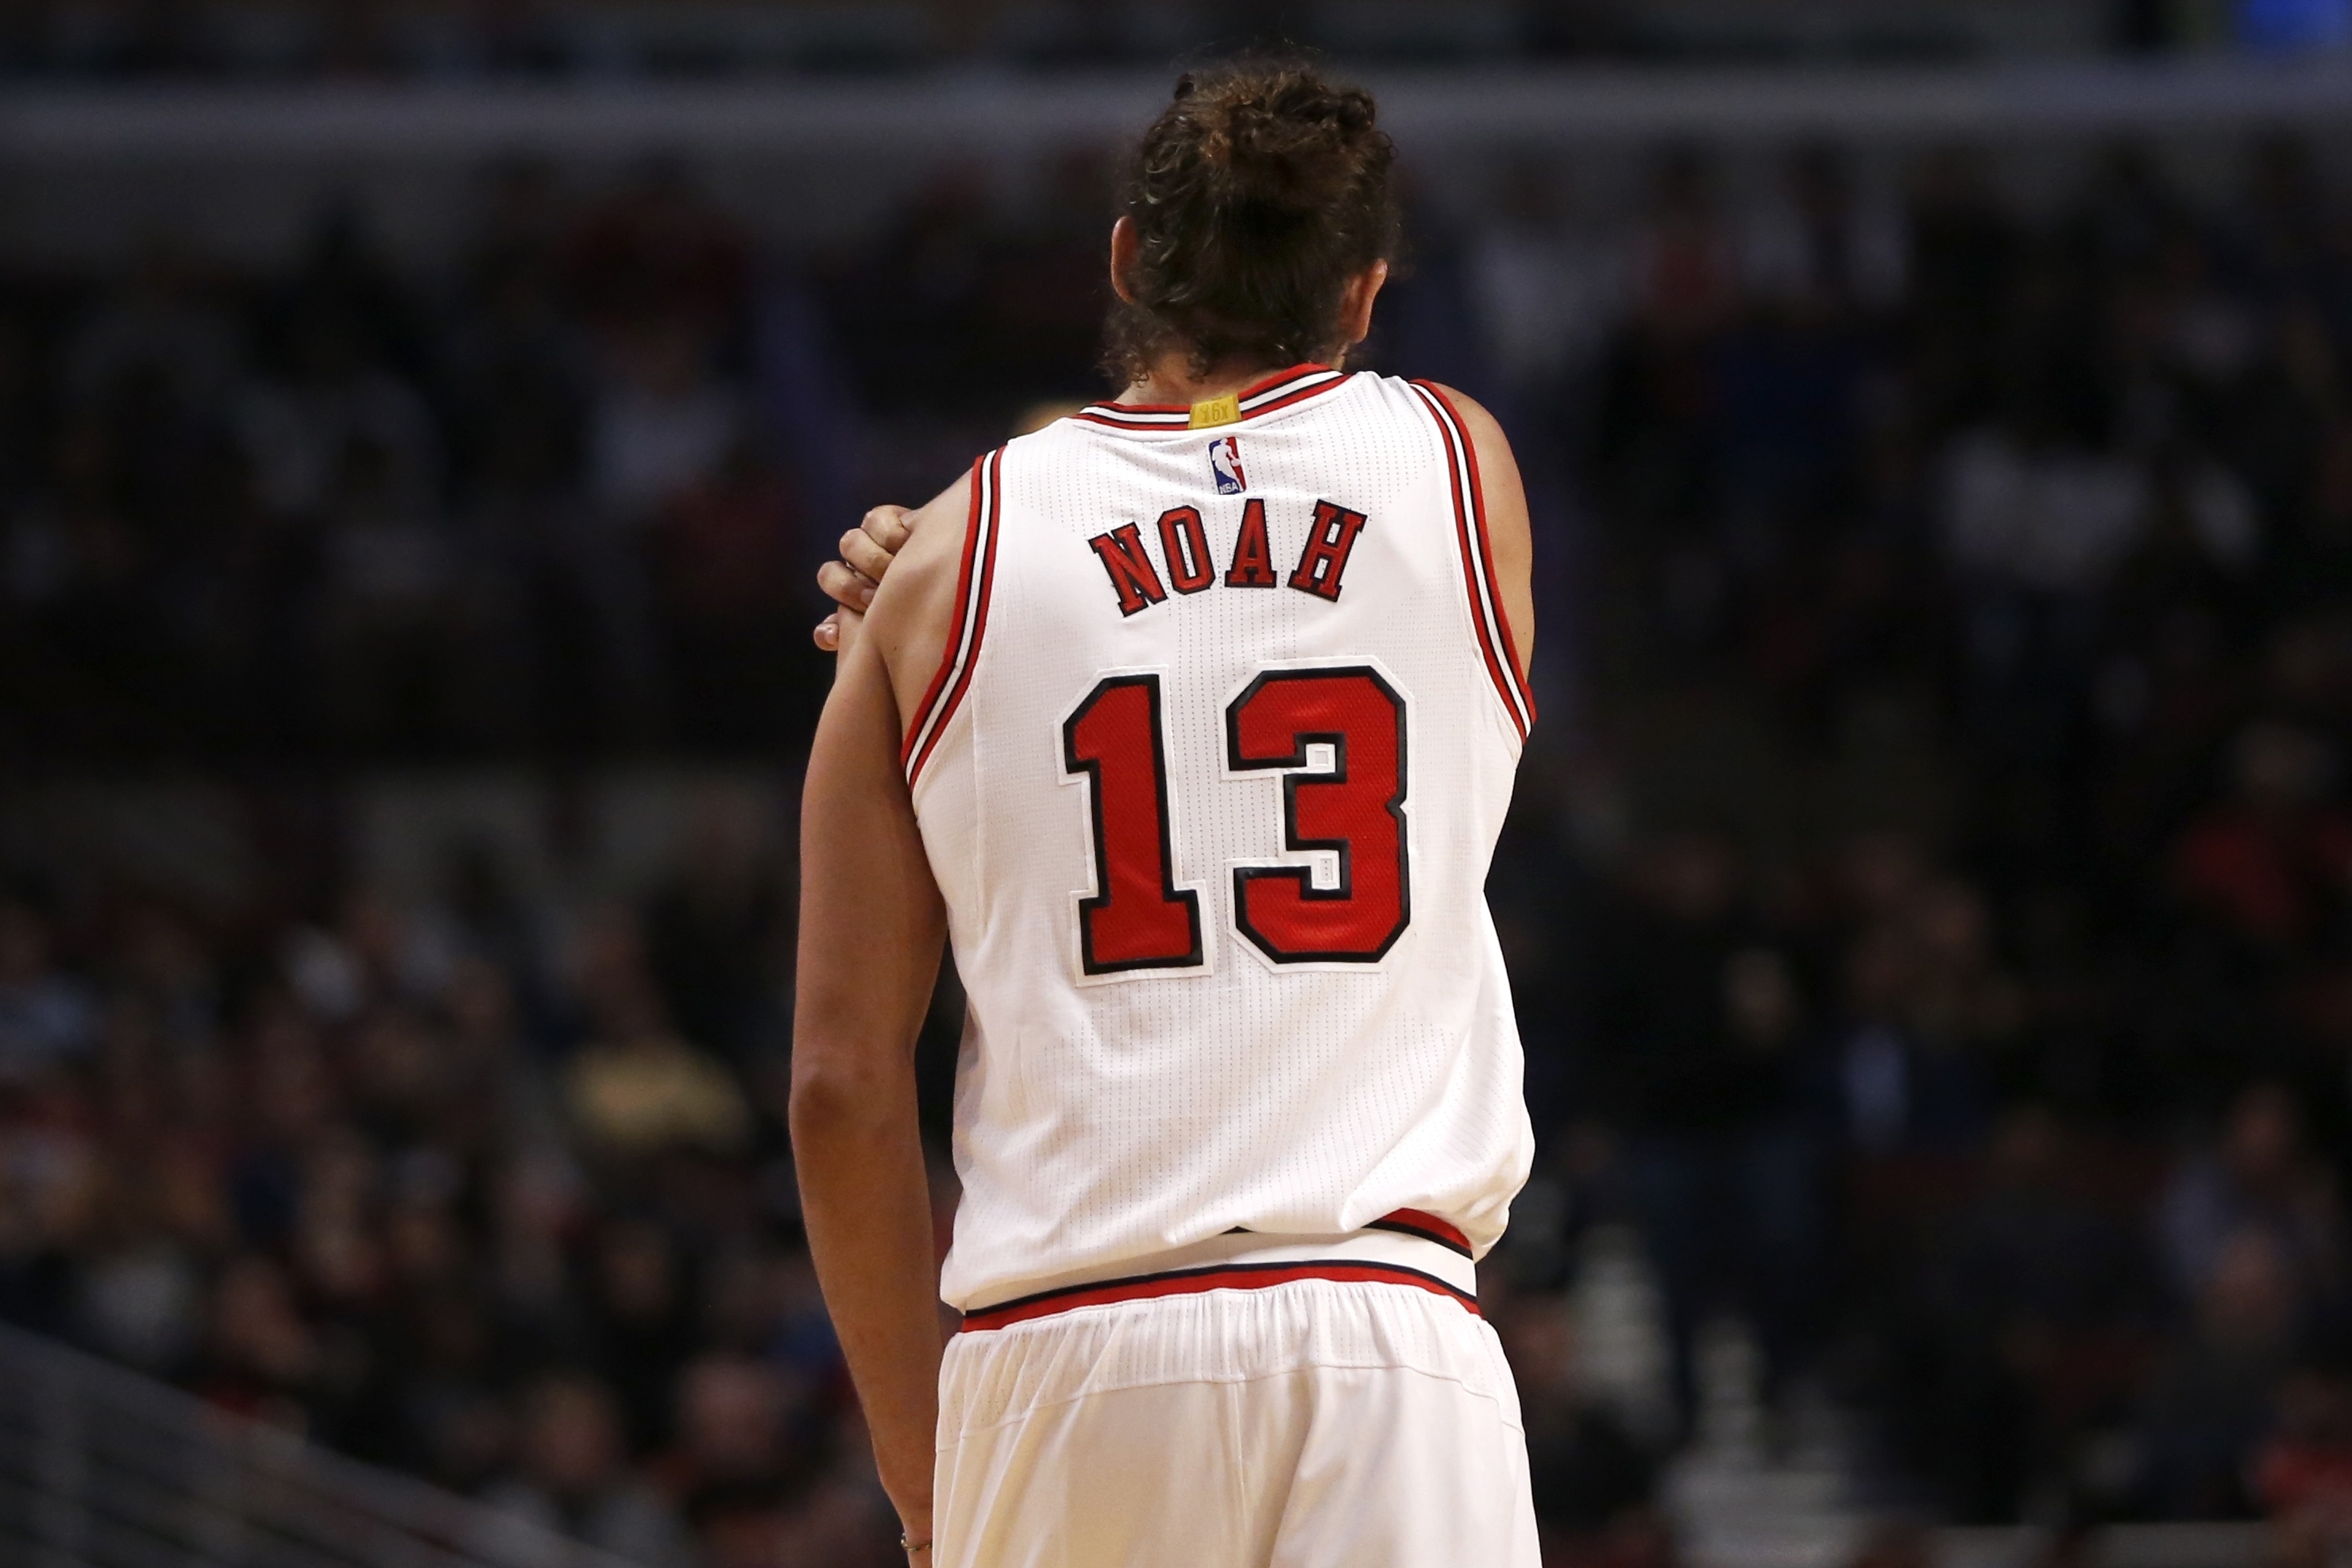 Joakim Noah injury news: Chicago Bulls center out two weeks